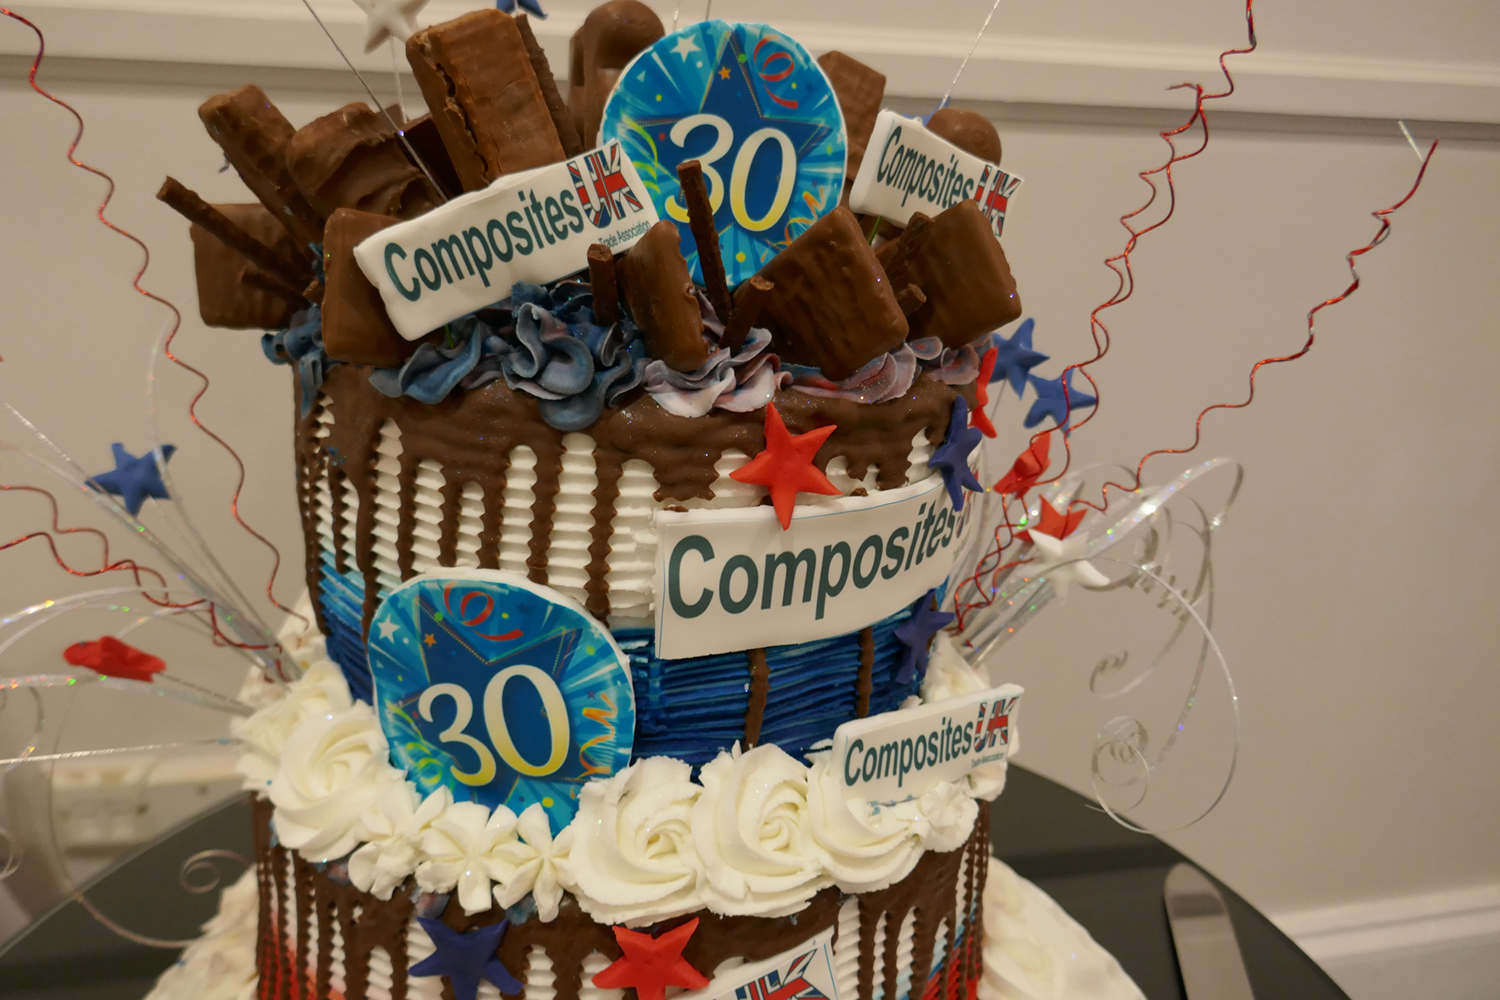 Composites UK has celebrated its 30 years old anniversary.